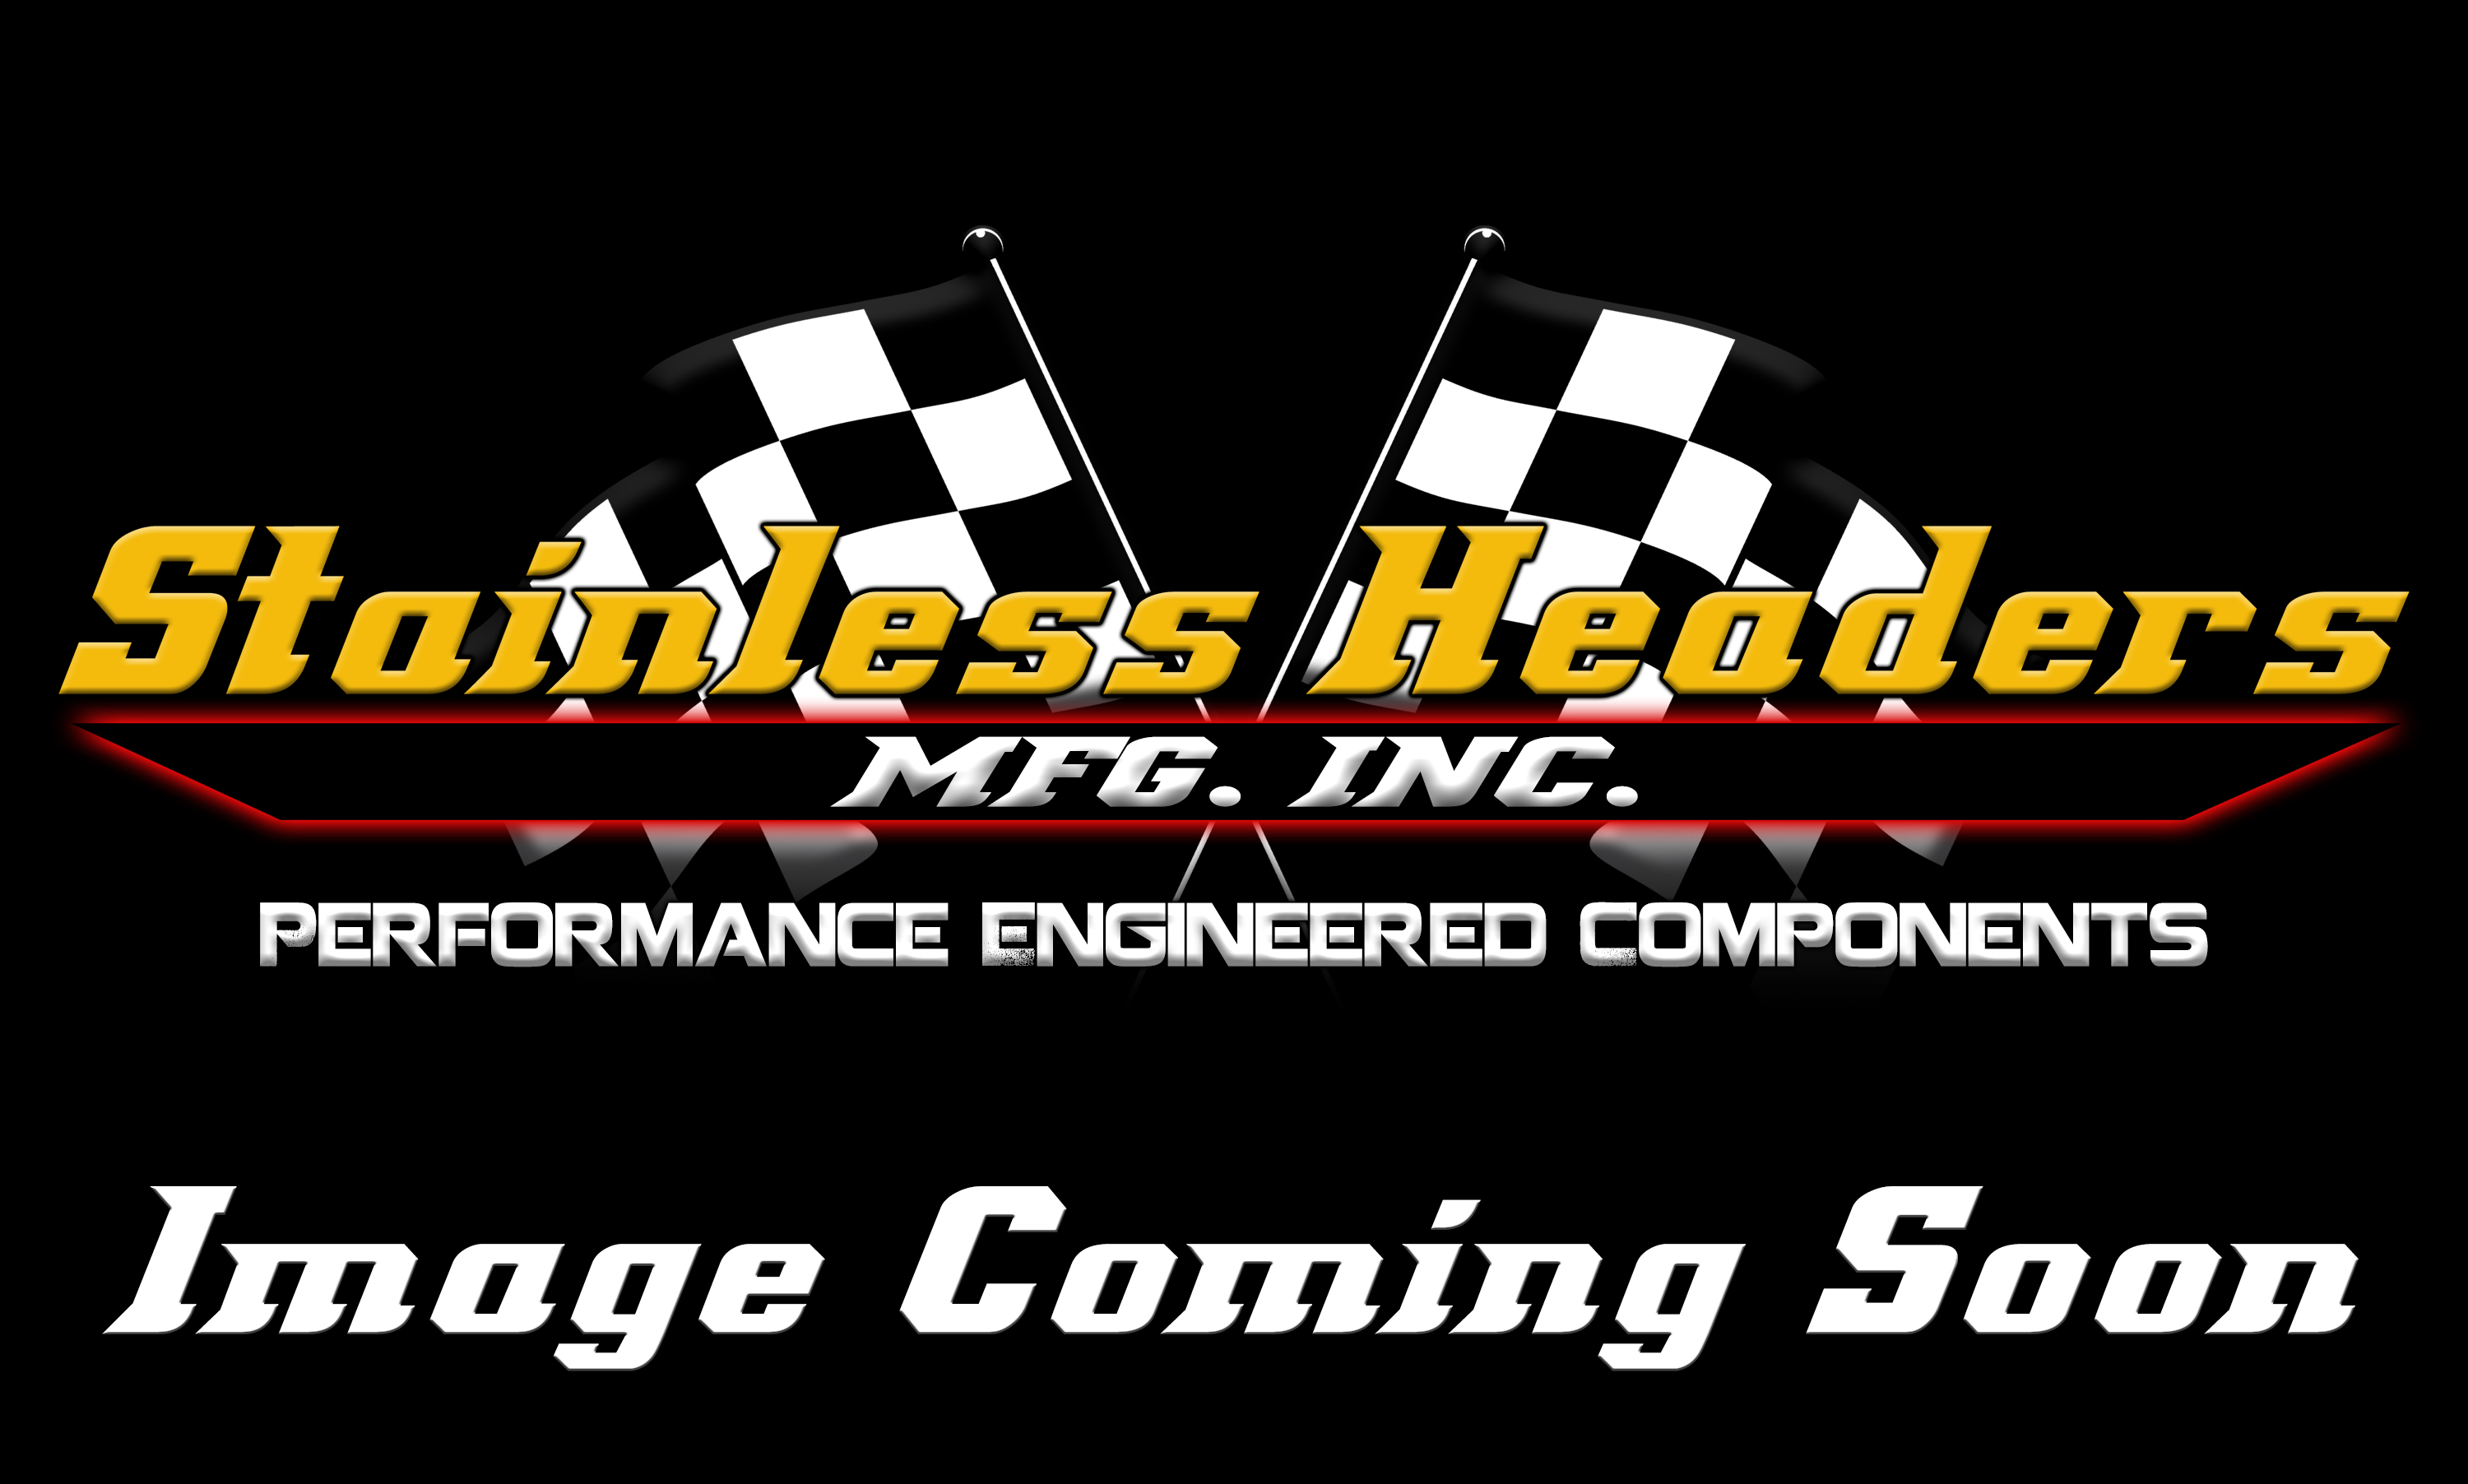 Stainless Headers - 1 5/8" Primary 6 into 1 Performance Merge Collector-16ga 304ss - Image 1